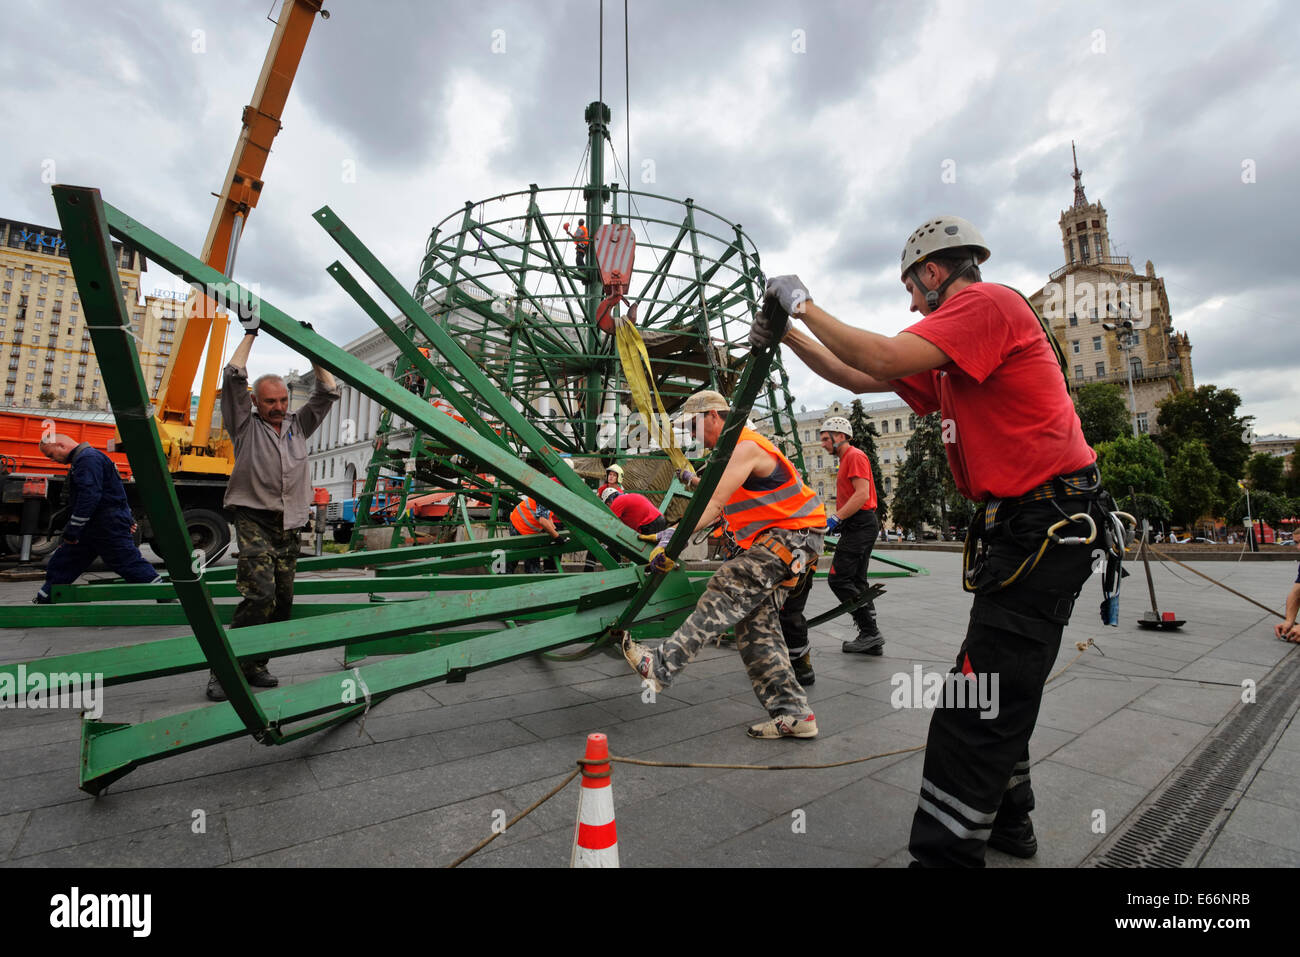 Kiev, Ukraine. 15 Aug 2014. 'Yolka' dismantled on Maidan in Kiev. 'Yolka' was an artificial Christmas tree, and a symbol of Euromaidan and the Ukrainian Revolution in Kiev in 2014. The construction, with all its flags and posters will be transferred in Ivan Honchar Museum. Credit:  Oleksandr Rupeta/Alamy Live News Stock Photo